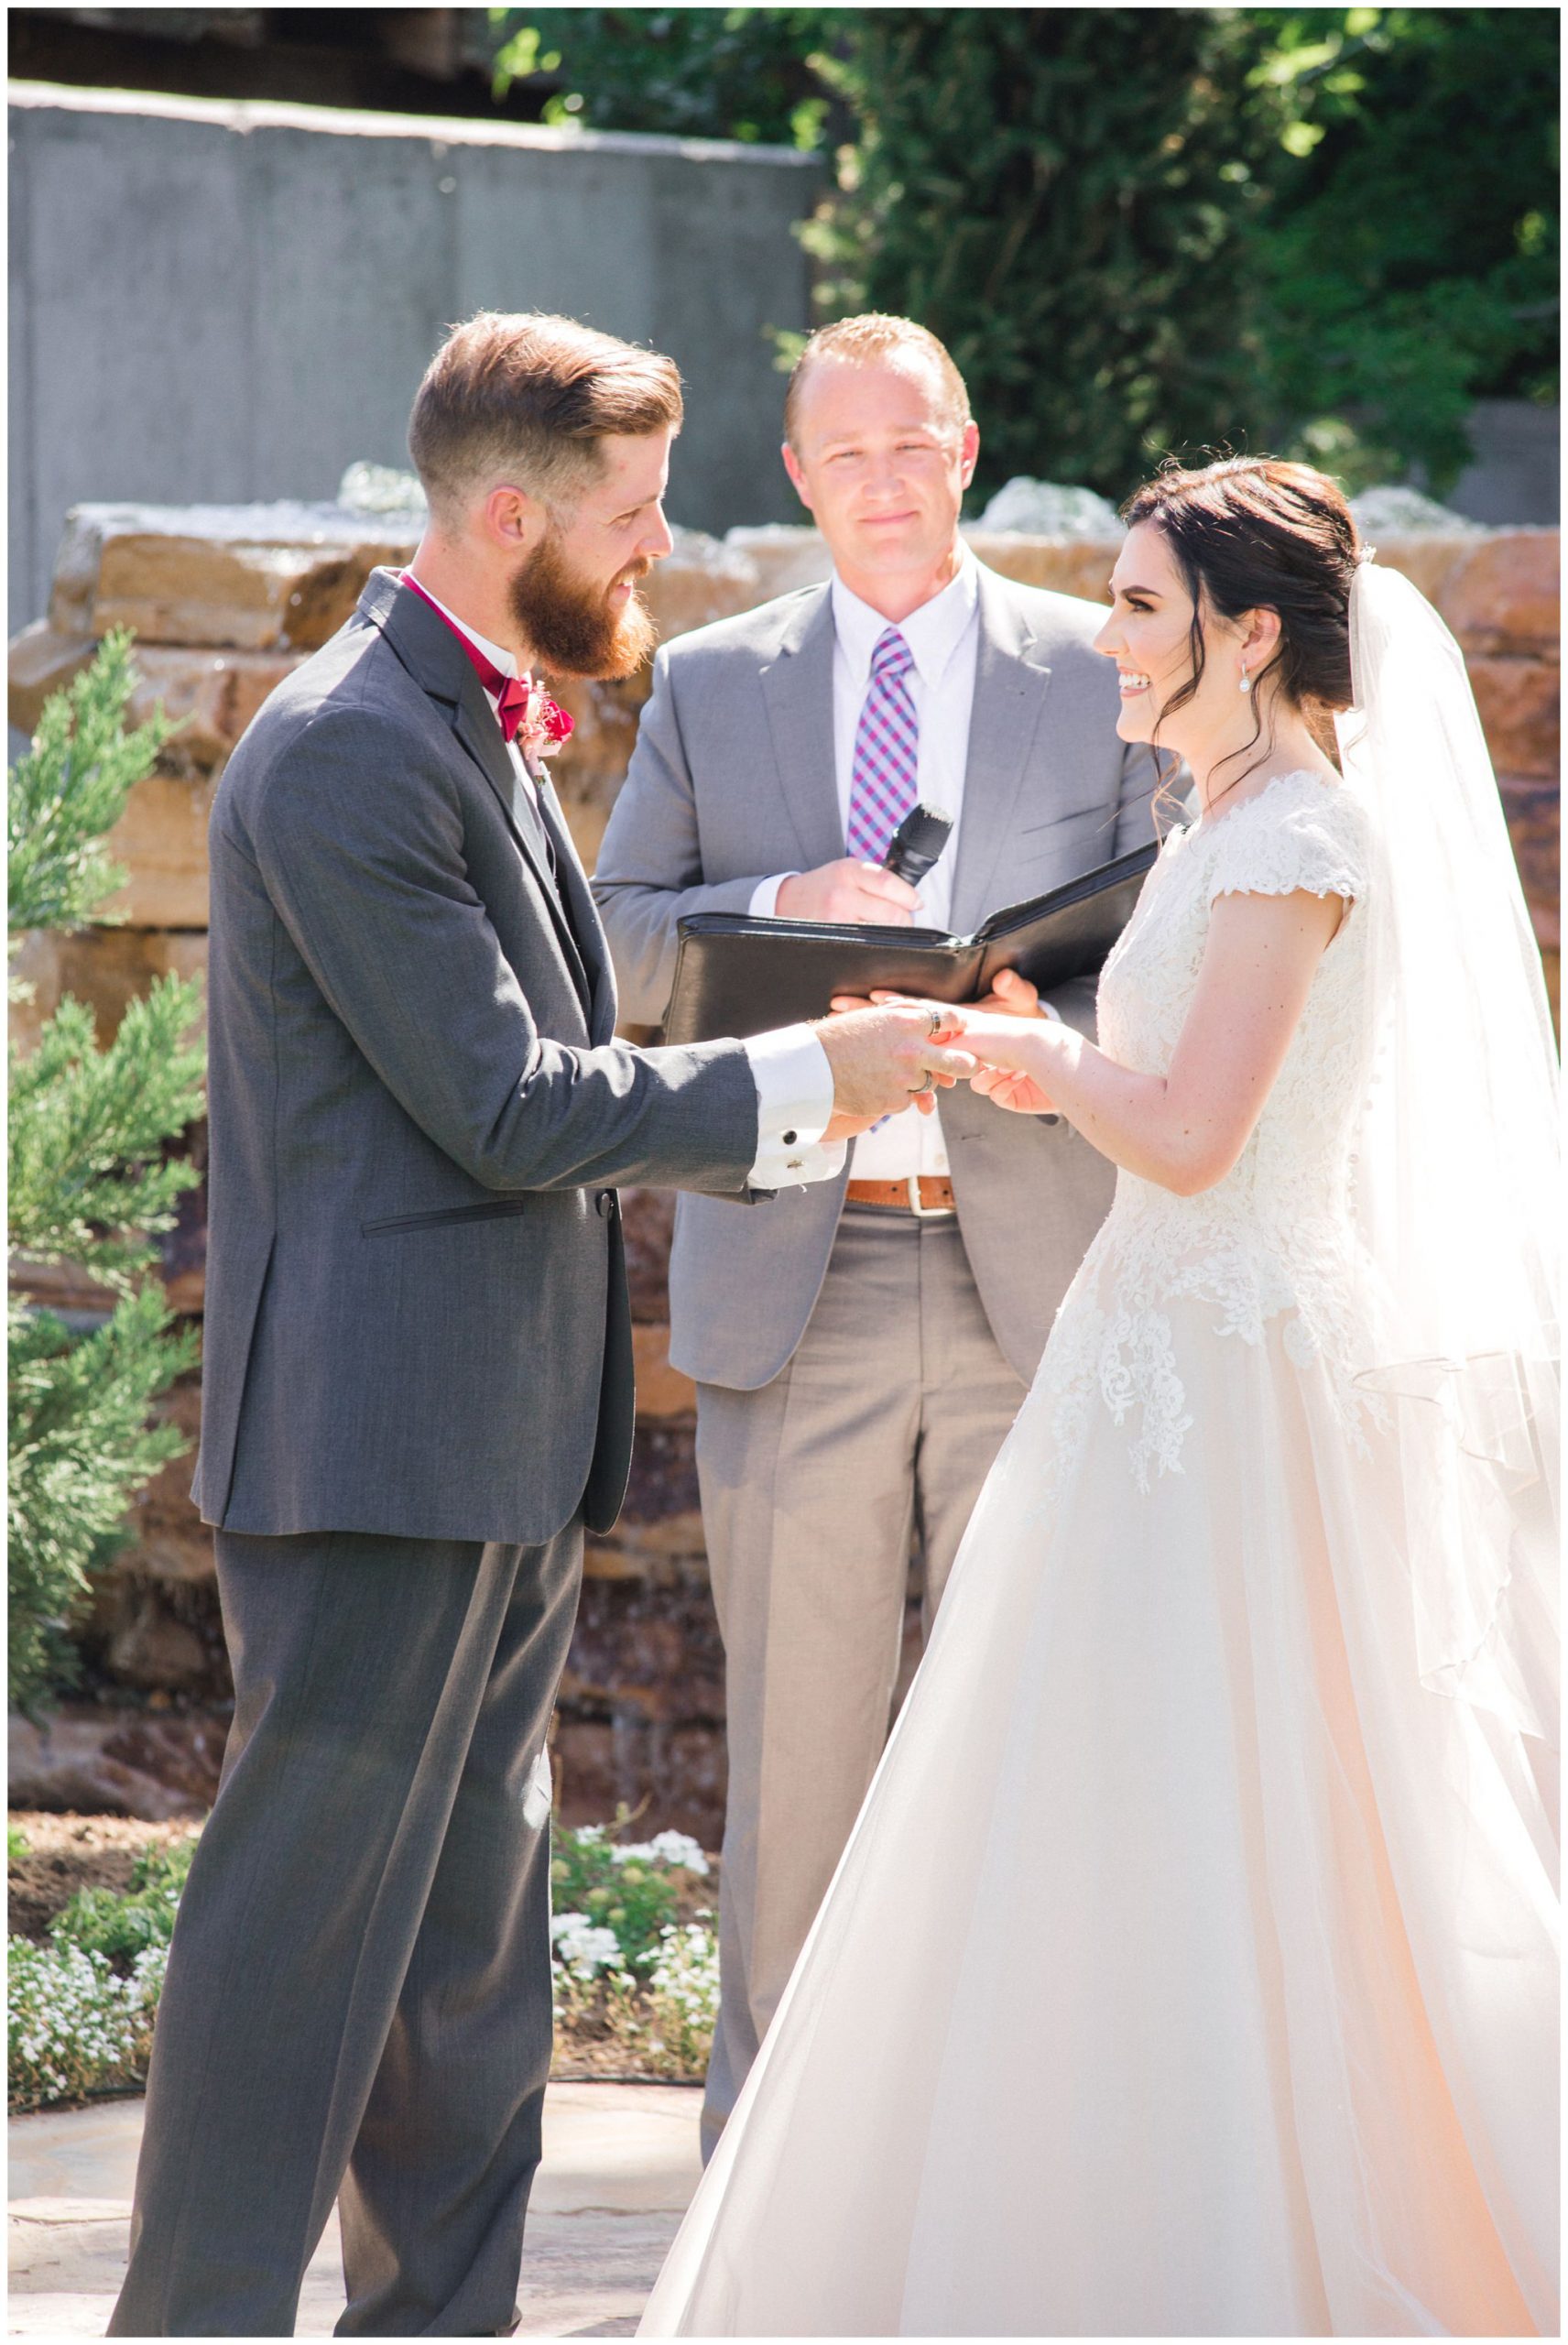 Bride and groom exchanging vows in Lindon utah at the Wild oak venue